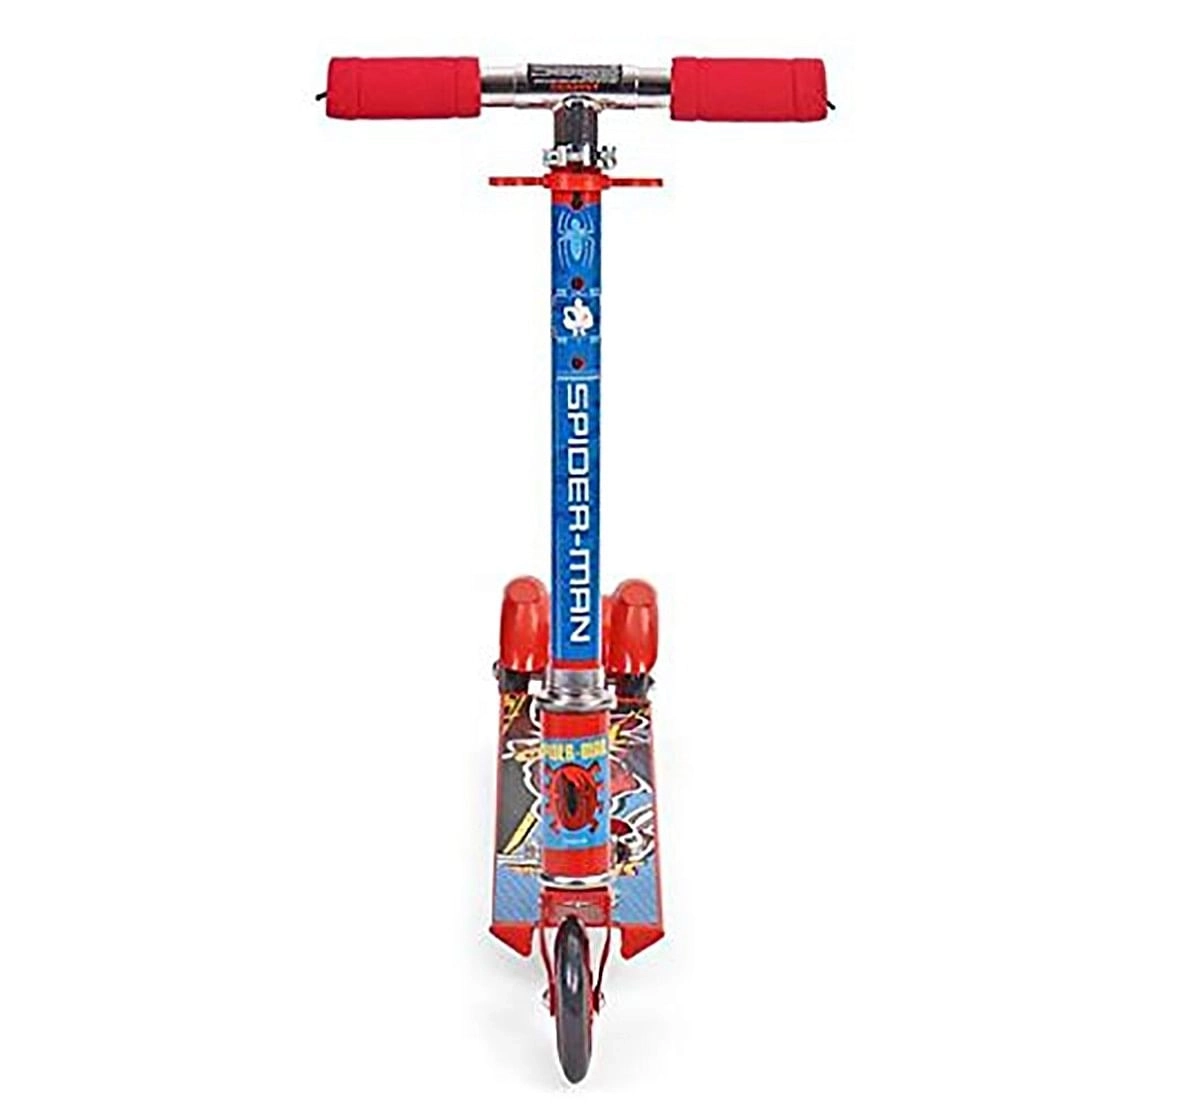 Marvel Spiderman 3 Wheel Scooter - Multi Color Scooters for Kids age 5Y+ 